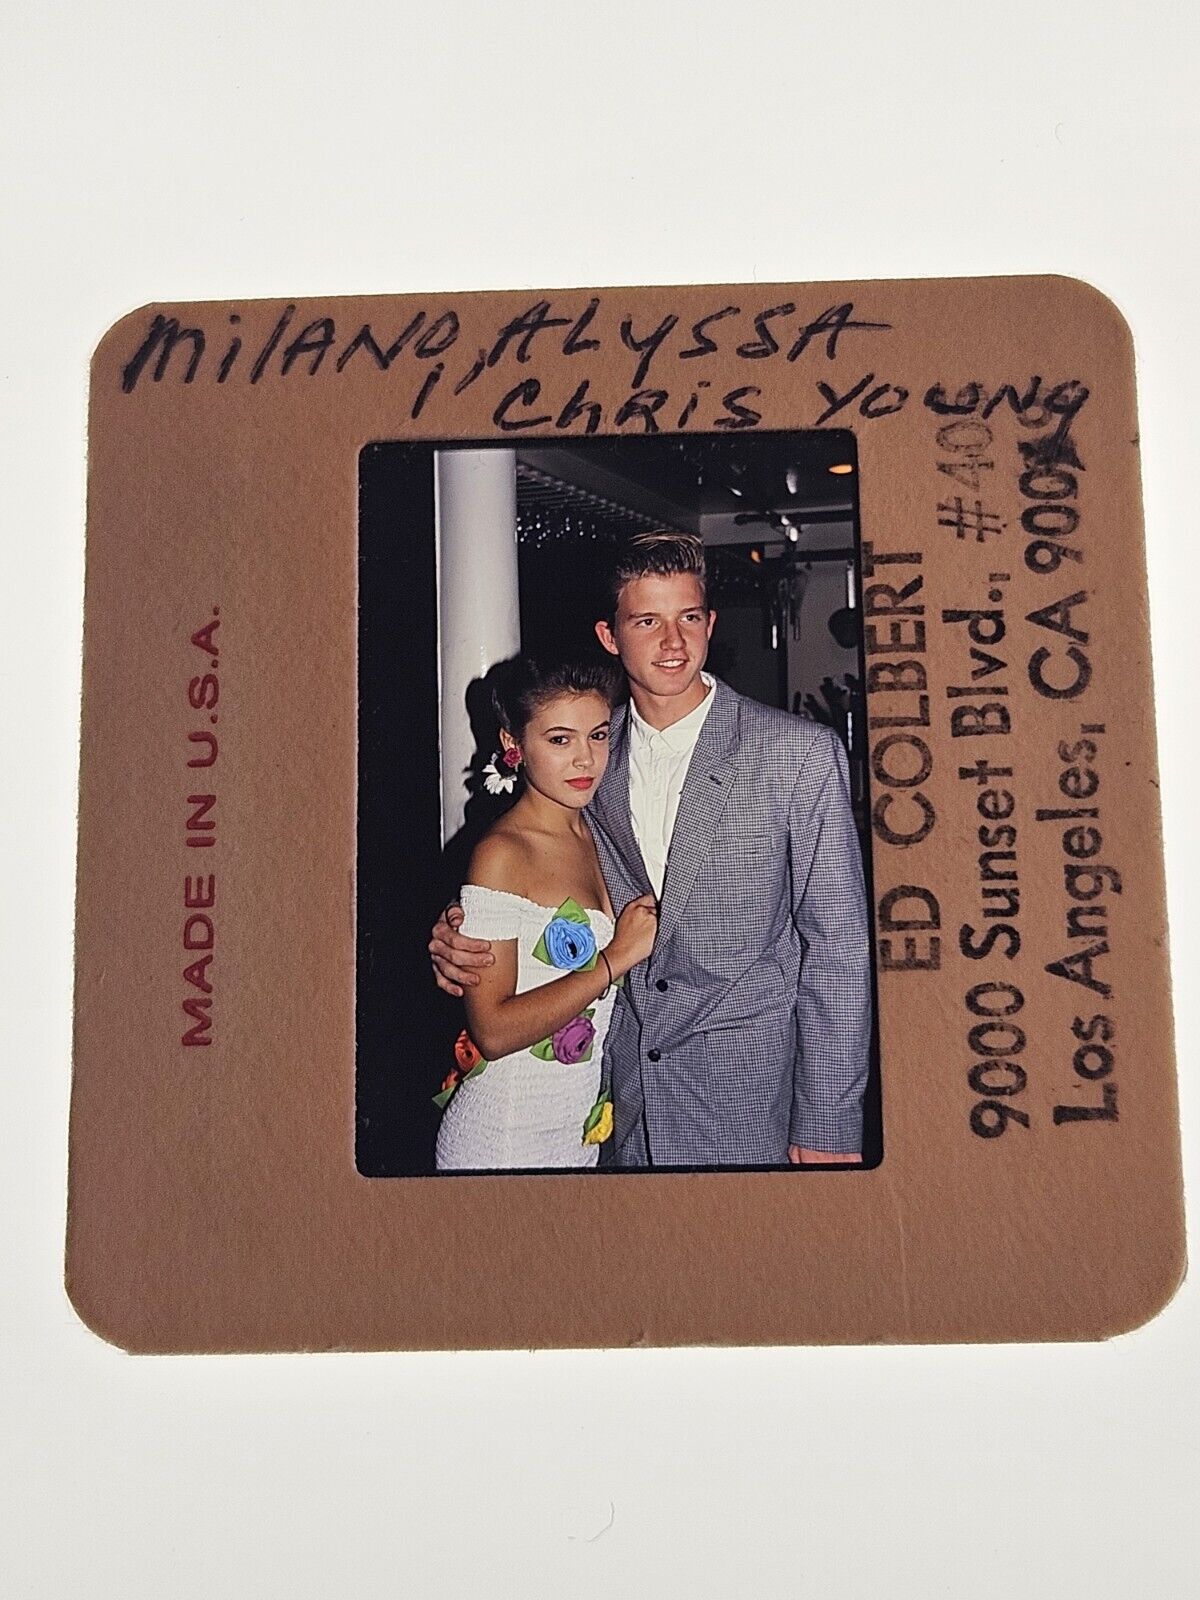 ALYSSA MILANO ACTRESS COLOR TRANSPARENCY 35MM PHOTO FILM SLIDE WITH CHRIS YOUNG